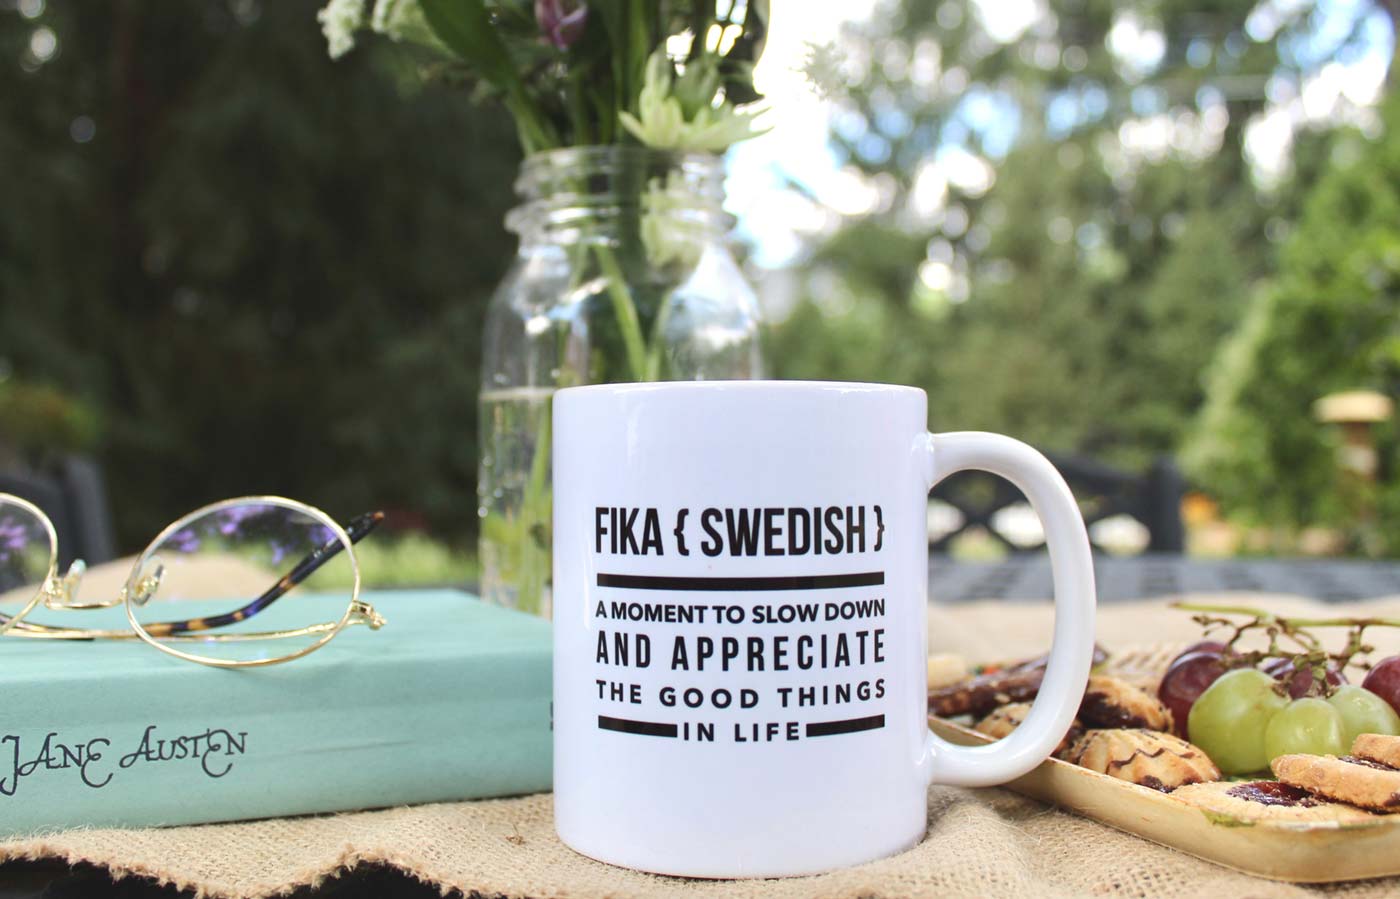 The Swedish tradition of fika is an intentional pause in the day. (Photo by Sylvia Rinderle)